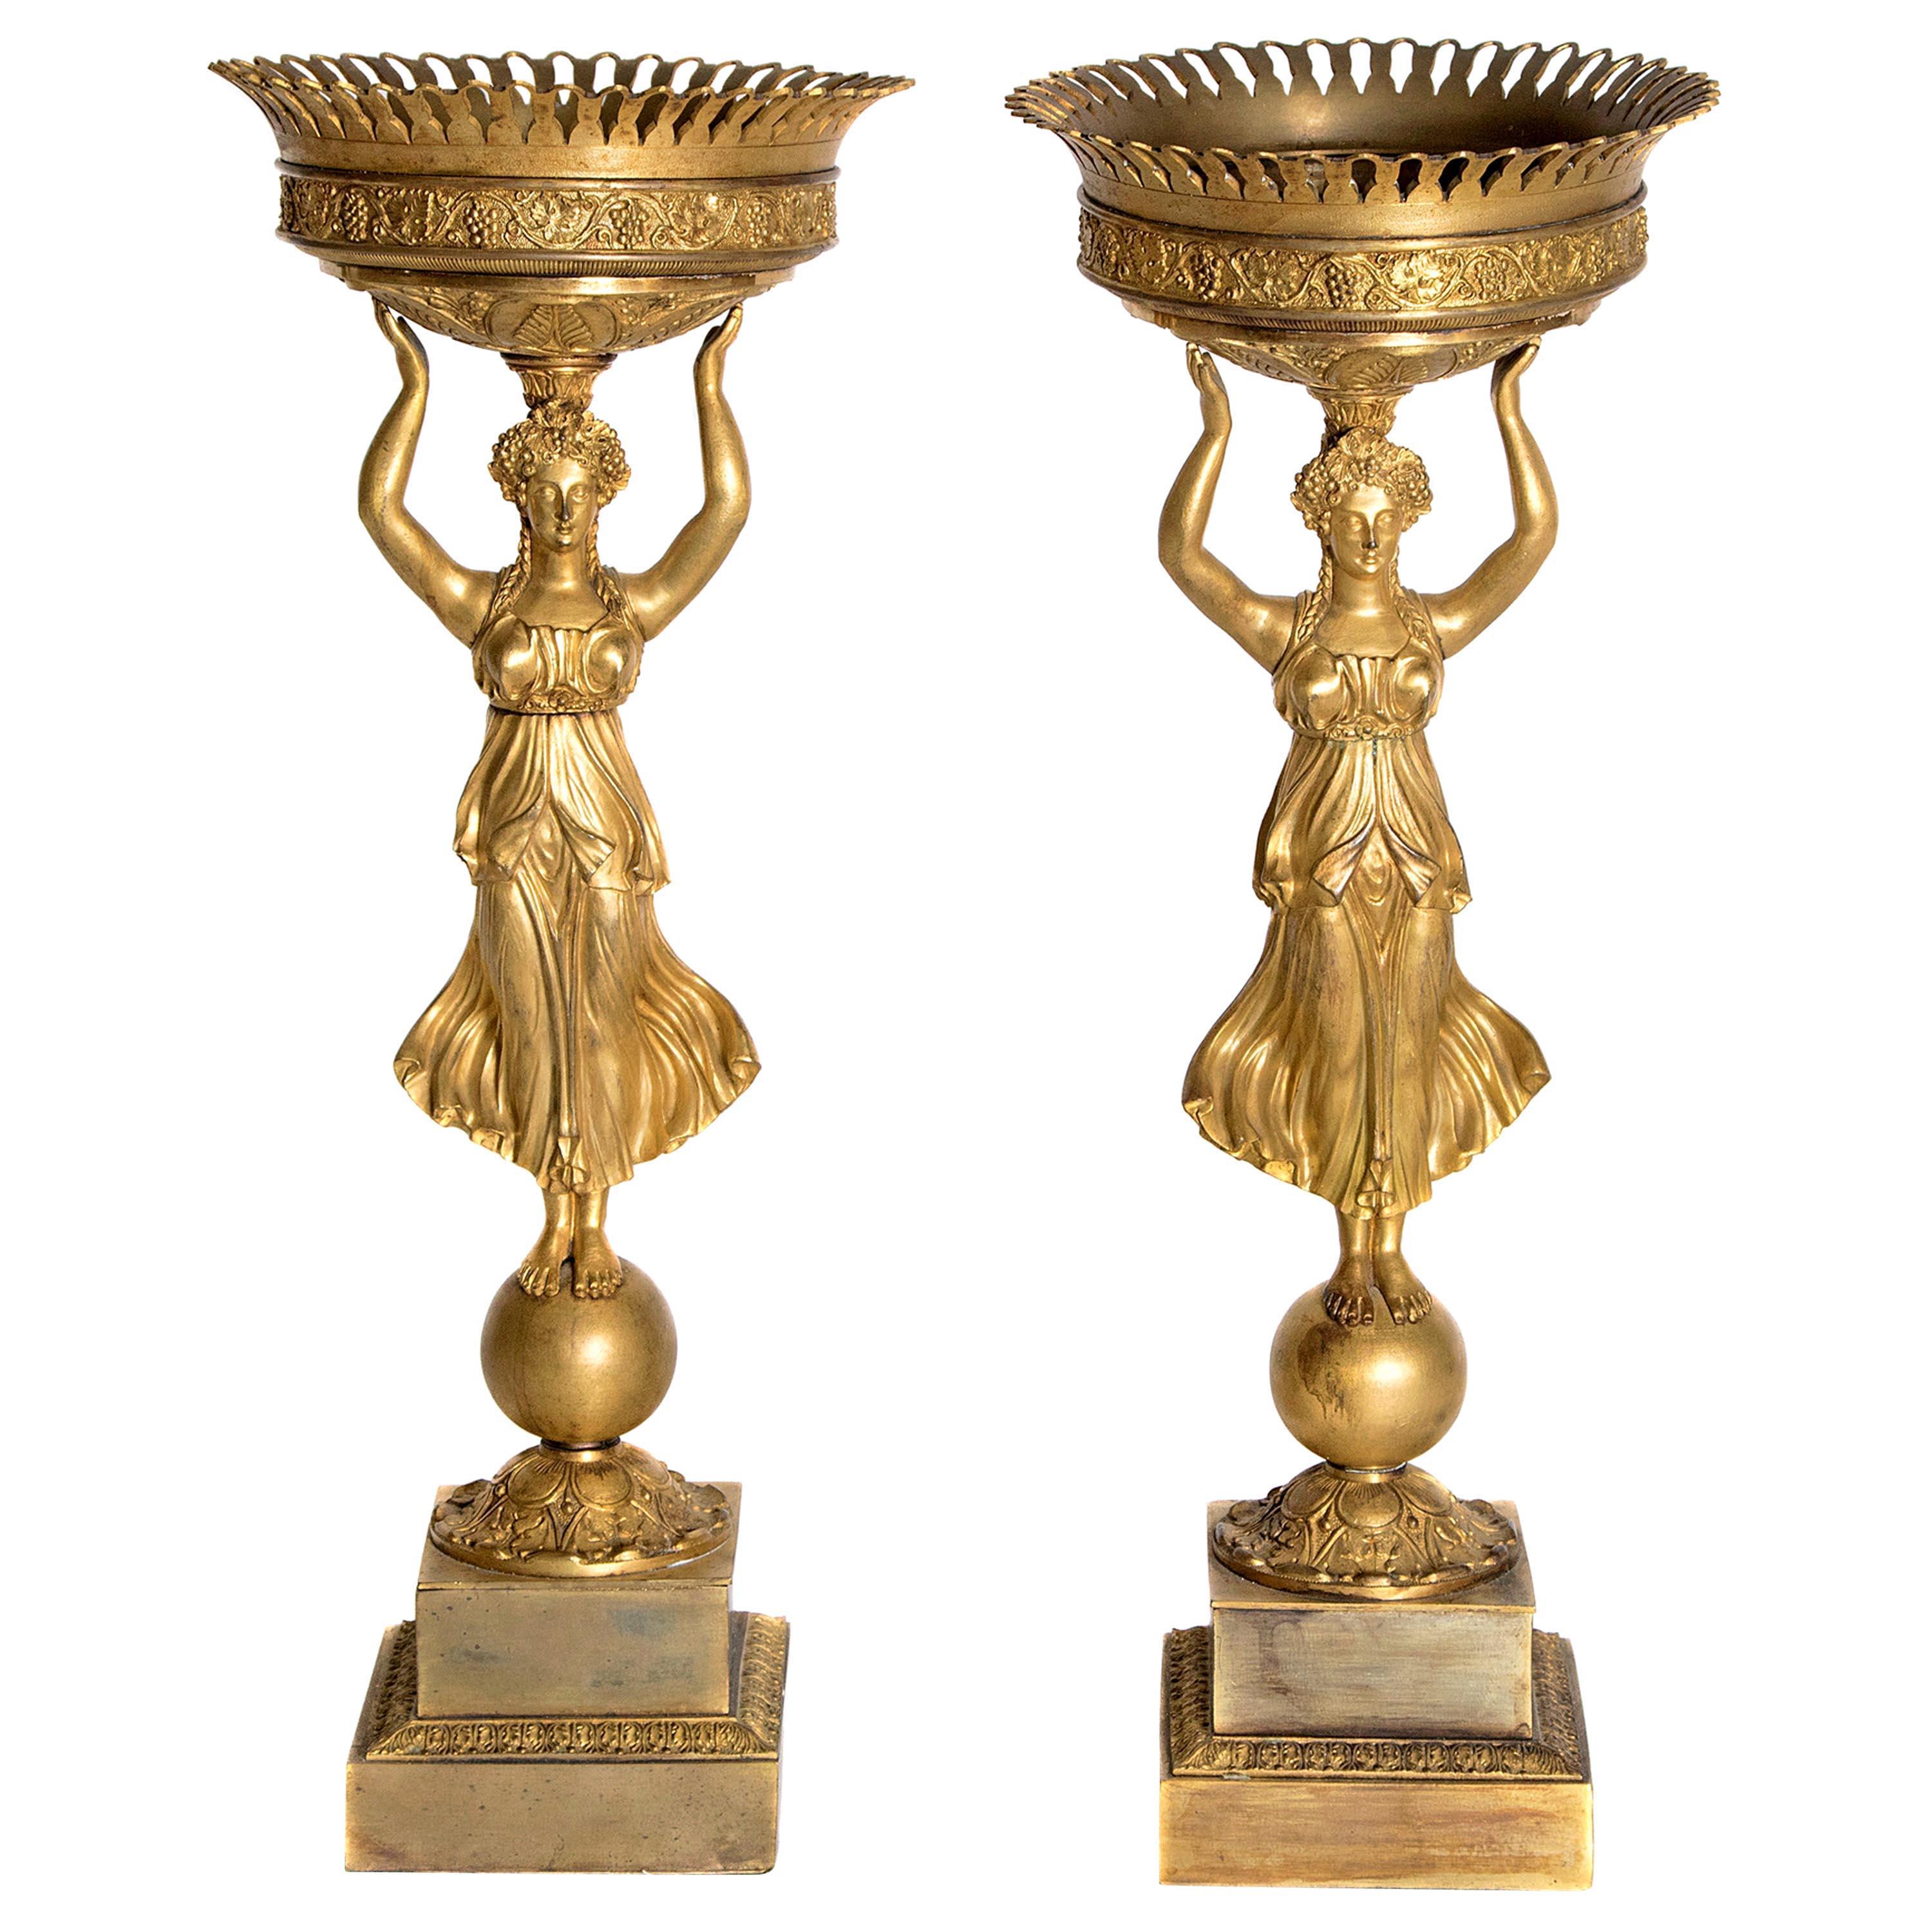 Early 19th Century Pair of French Empire Gilt Bronze Centerpiece Tazzzas